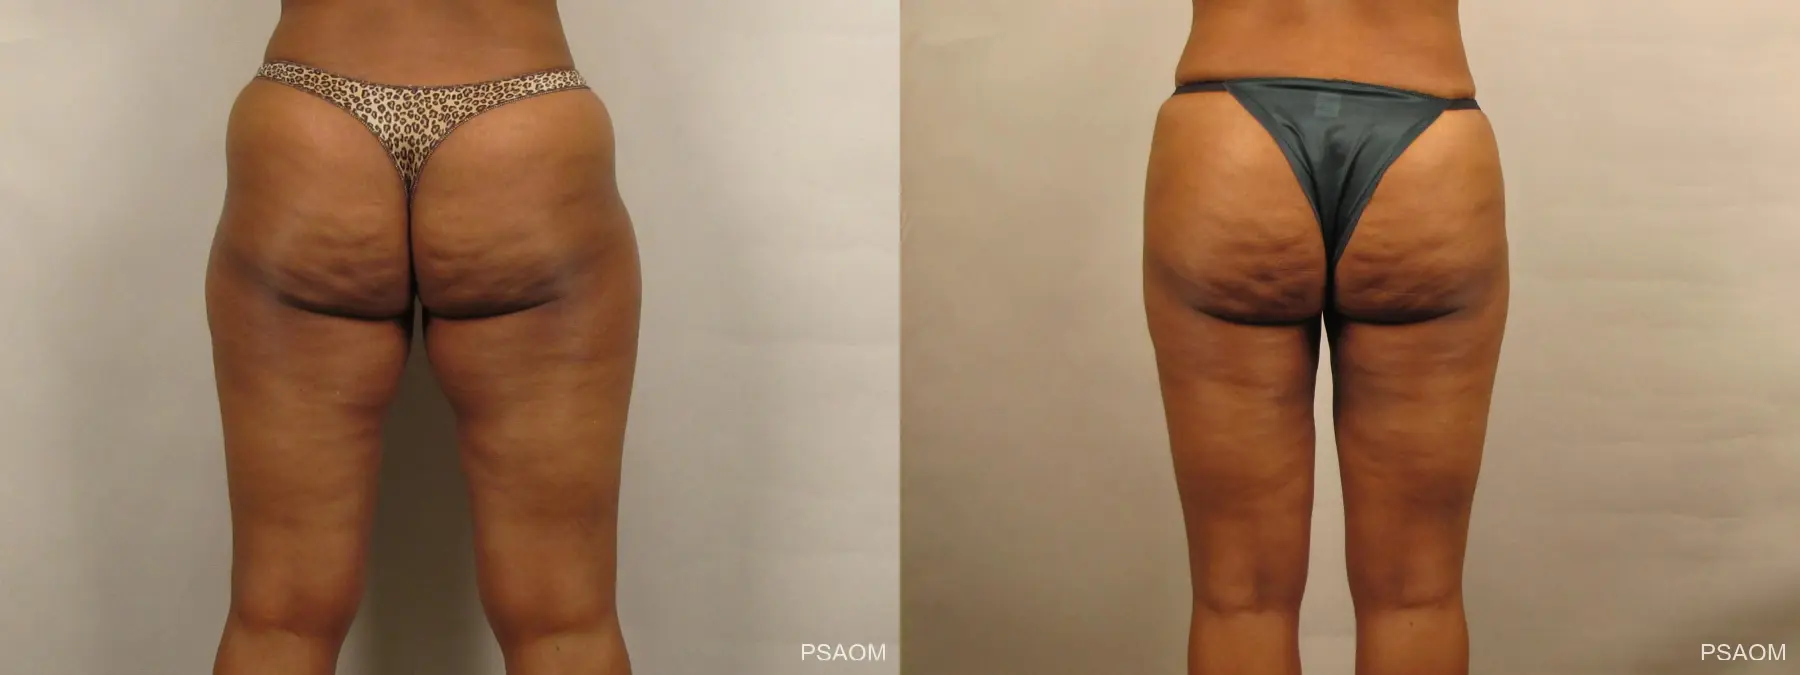 Liposuction: Patient 1 - Before and After 3